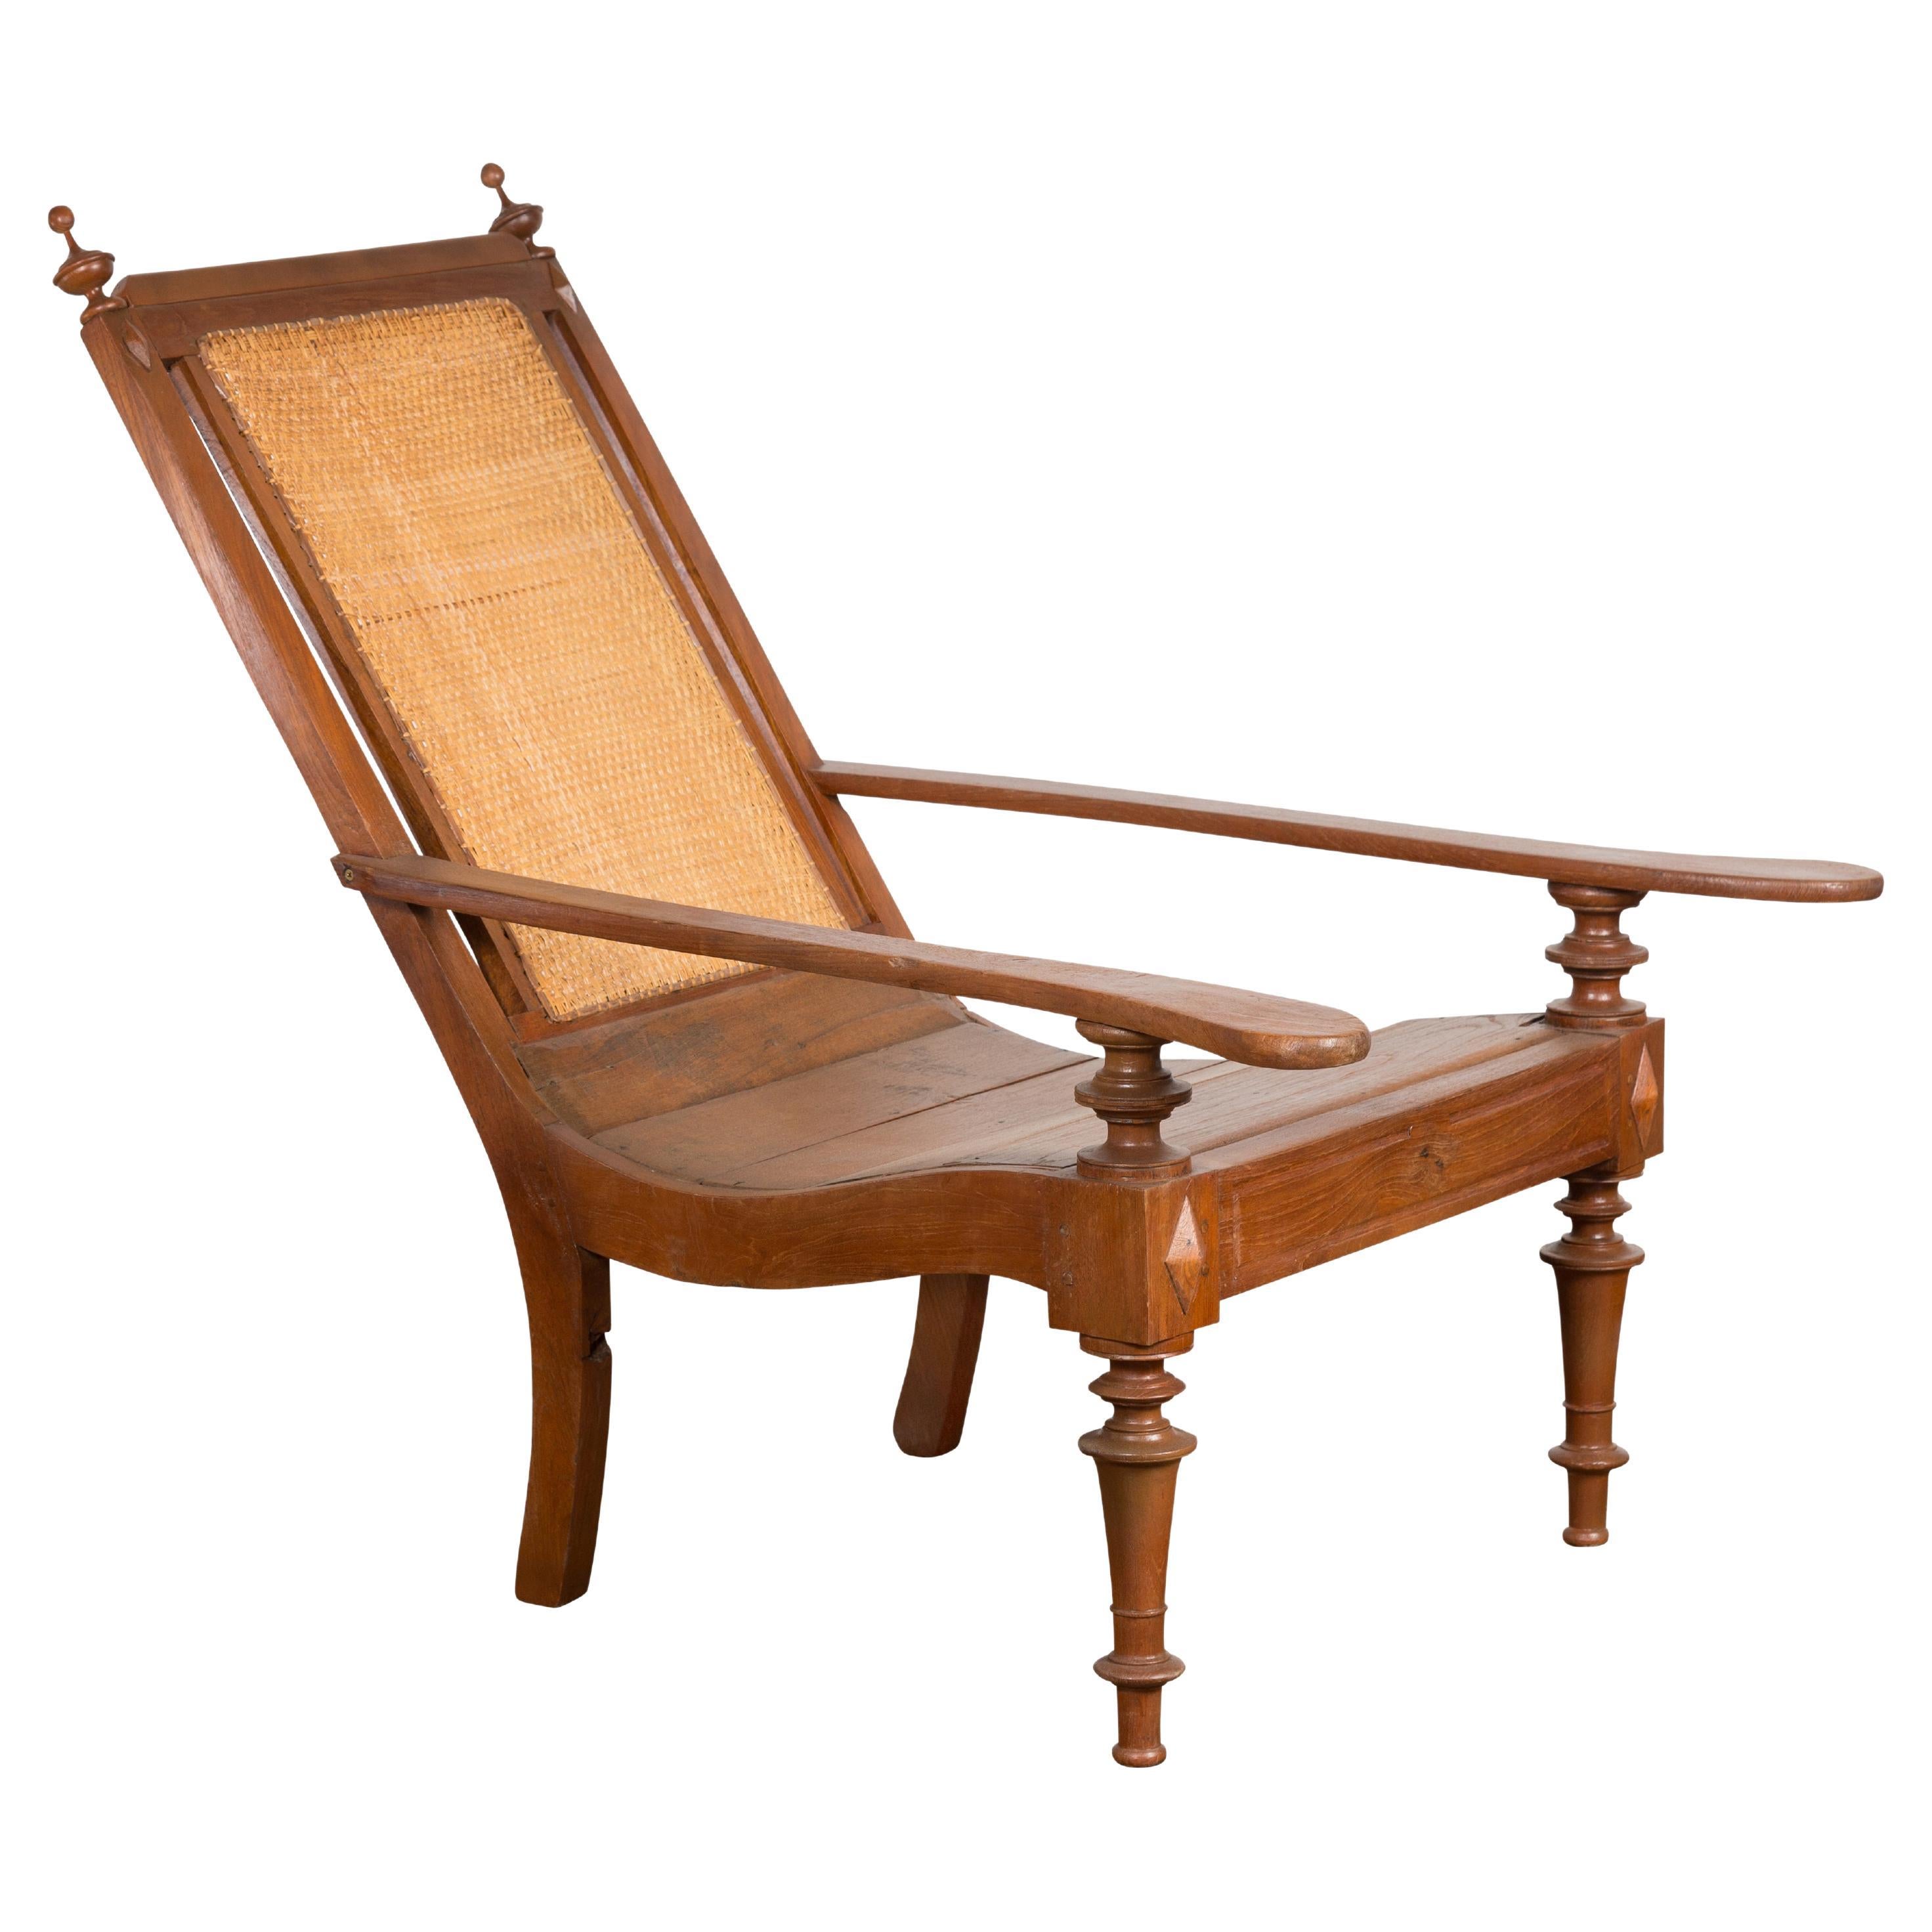 Dutch Colonial Wood and Rattan Lounge Chair with Slanted Back and Carved Finials For Sale